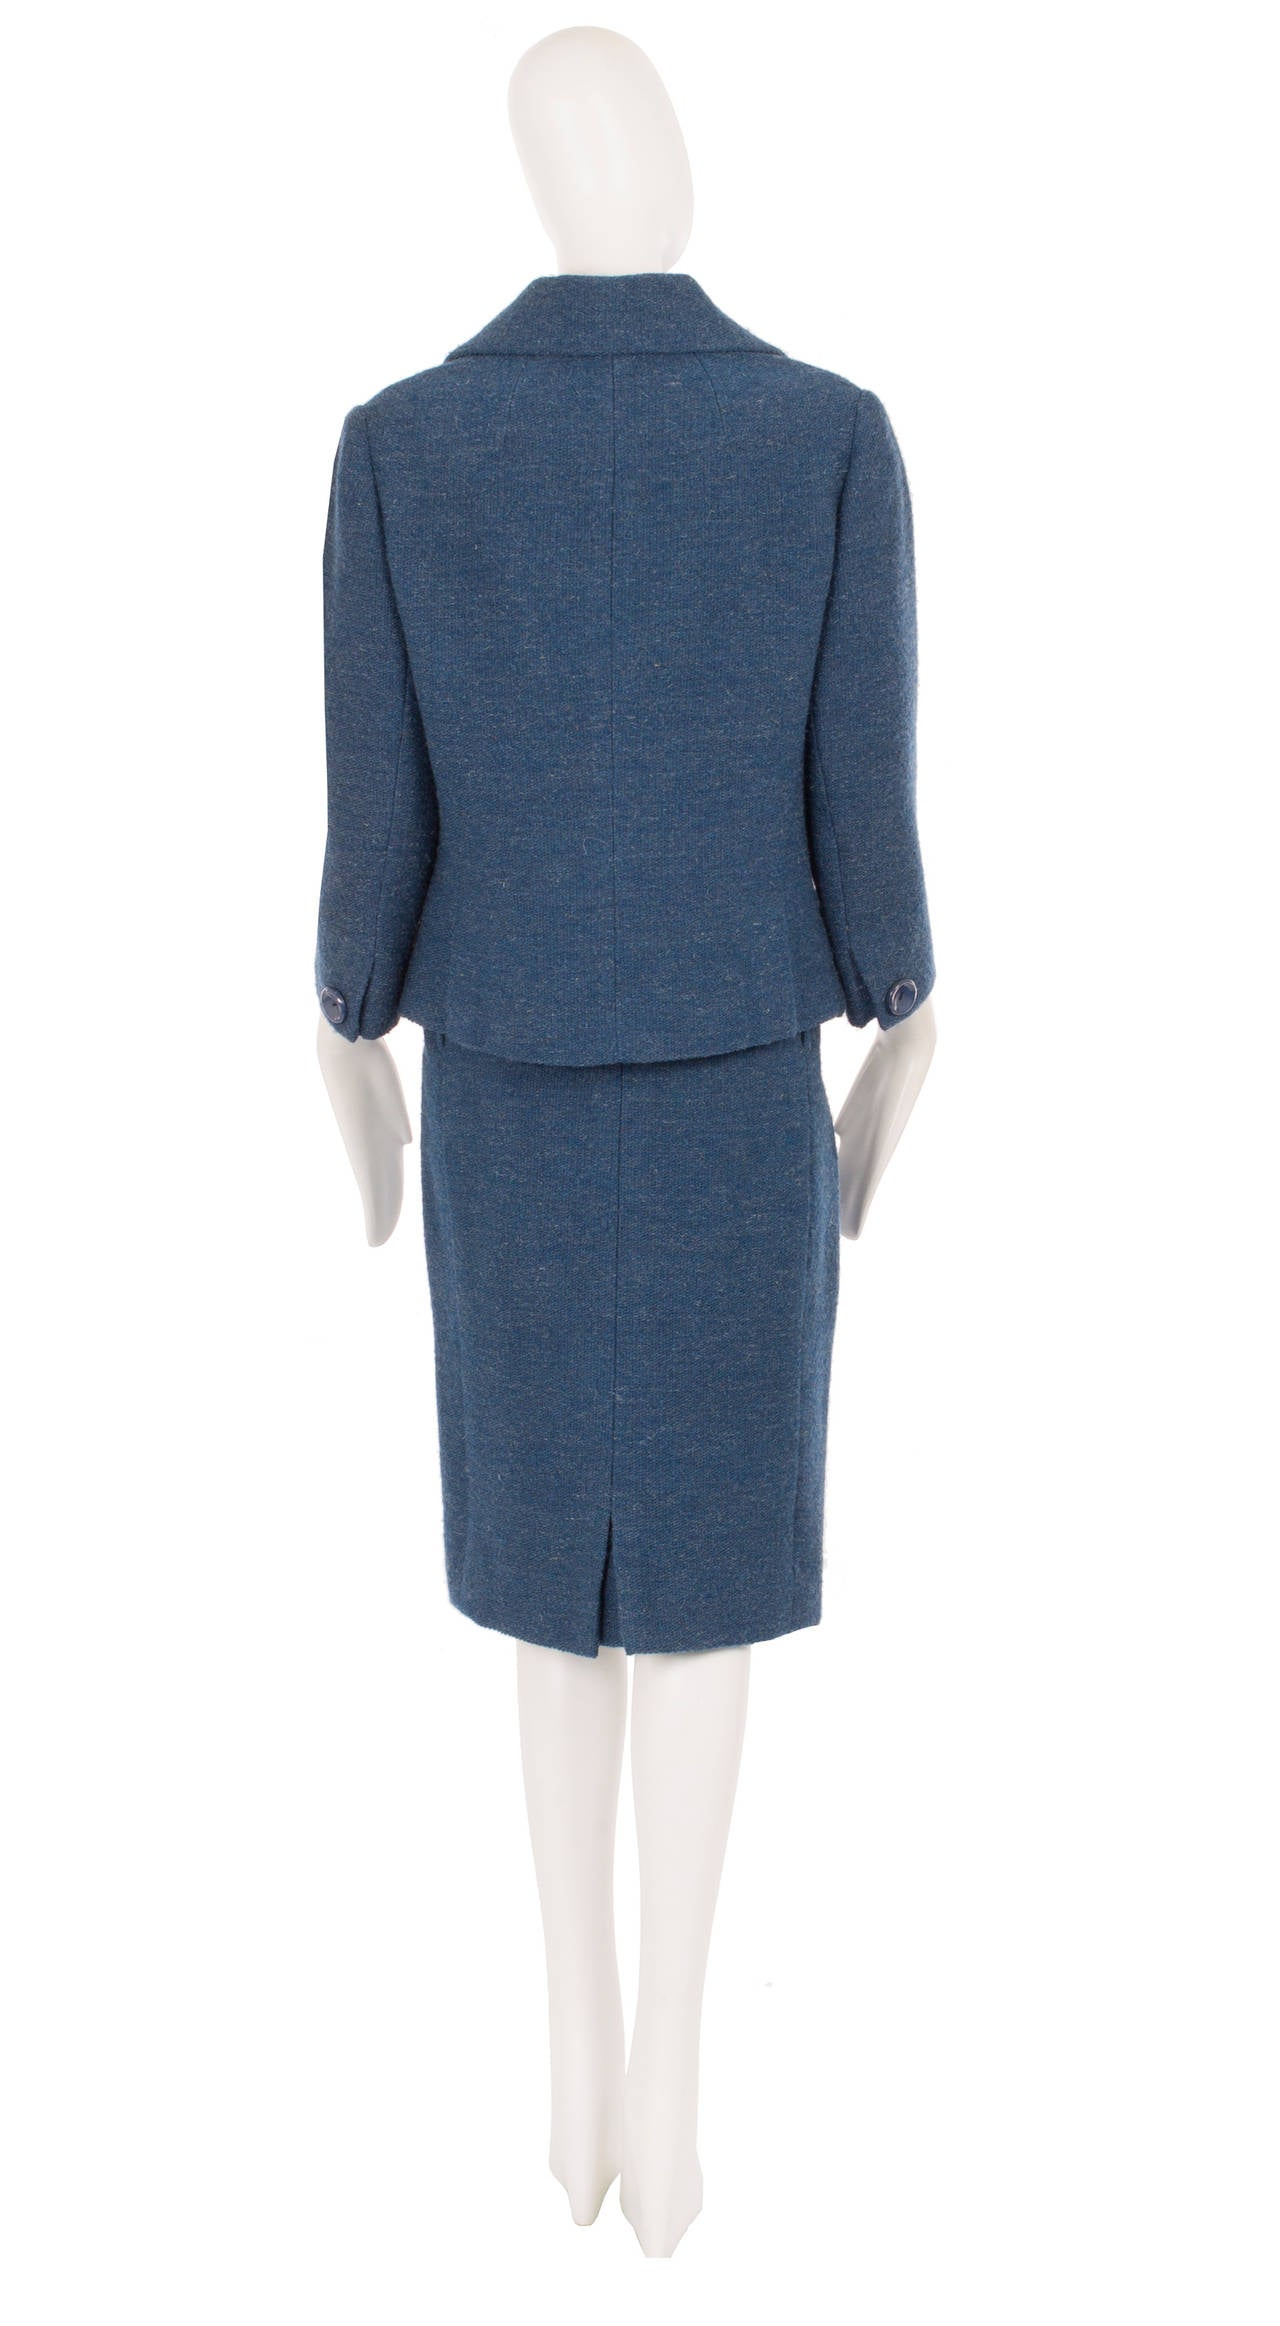 This classic Dior skirt suit in a wonderful shade of blue wool is the perfect option for the office. Expertly cut, the jacket features a wide double lapel collar and pocket detail on the hip. A single button fastens on the waist, with an additional